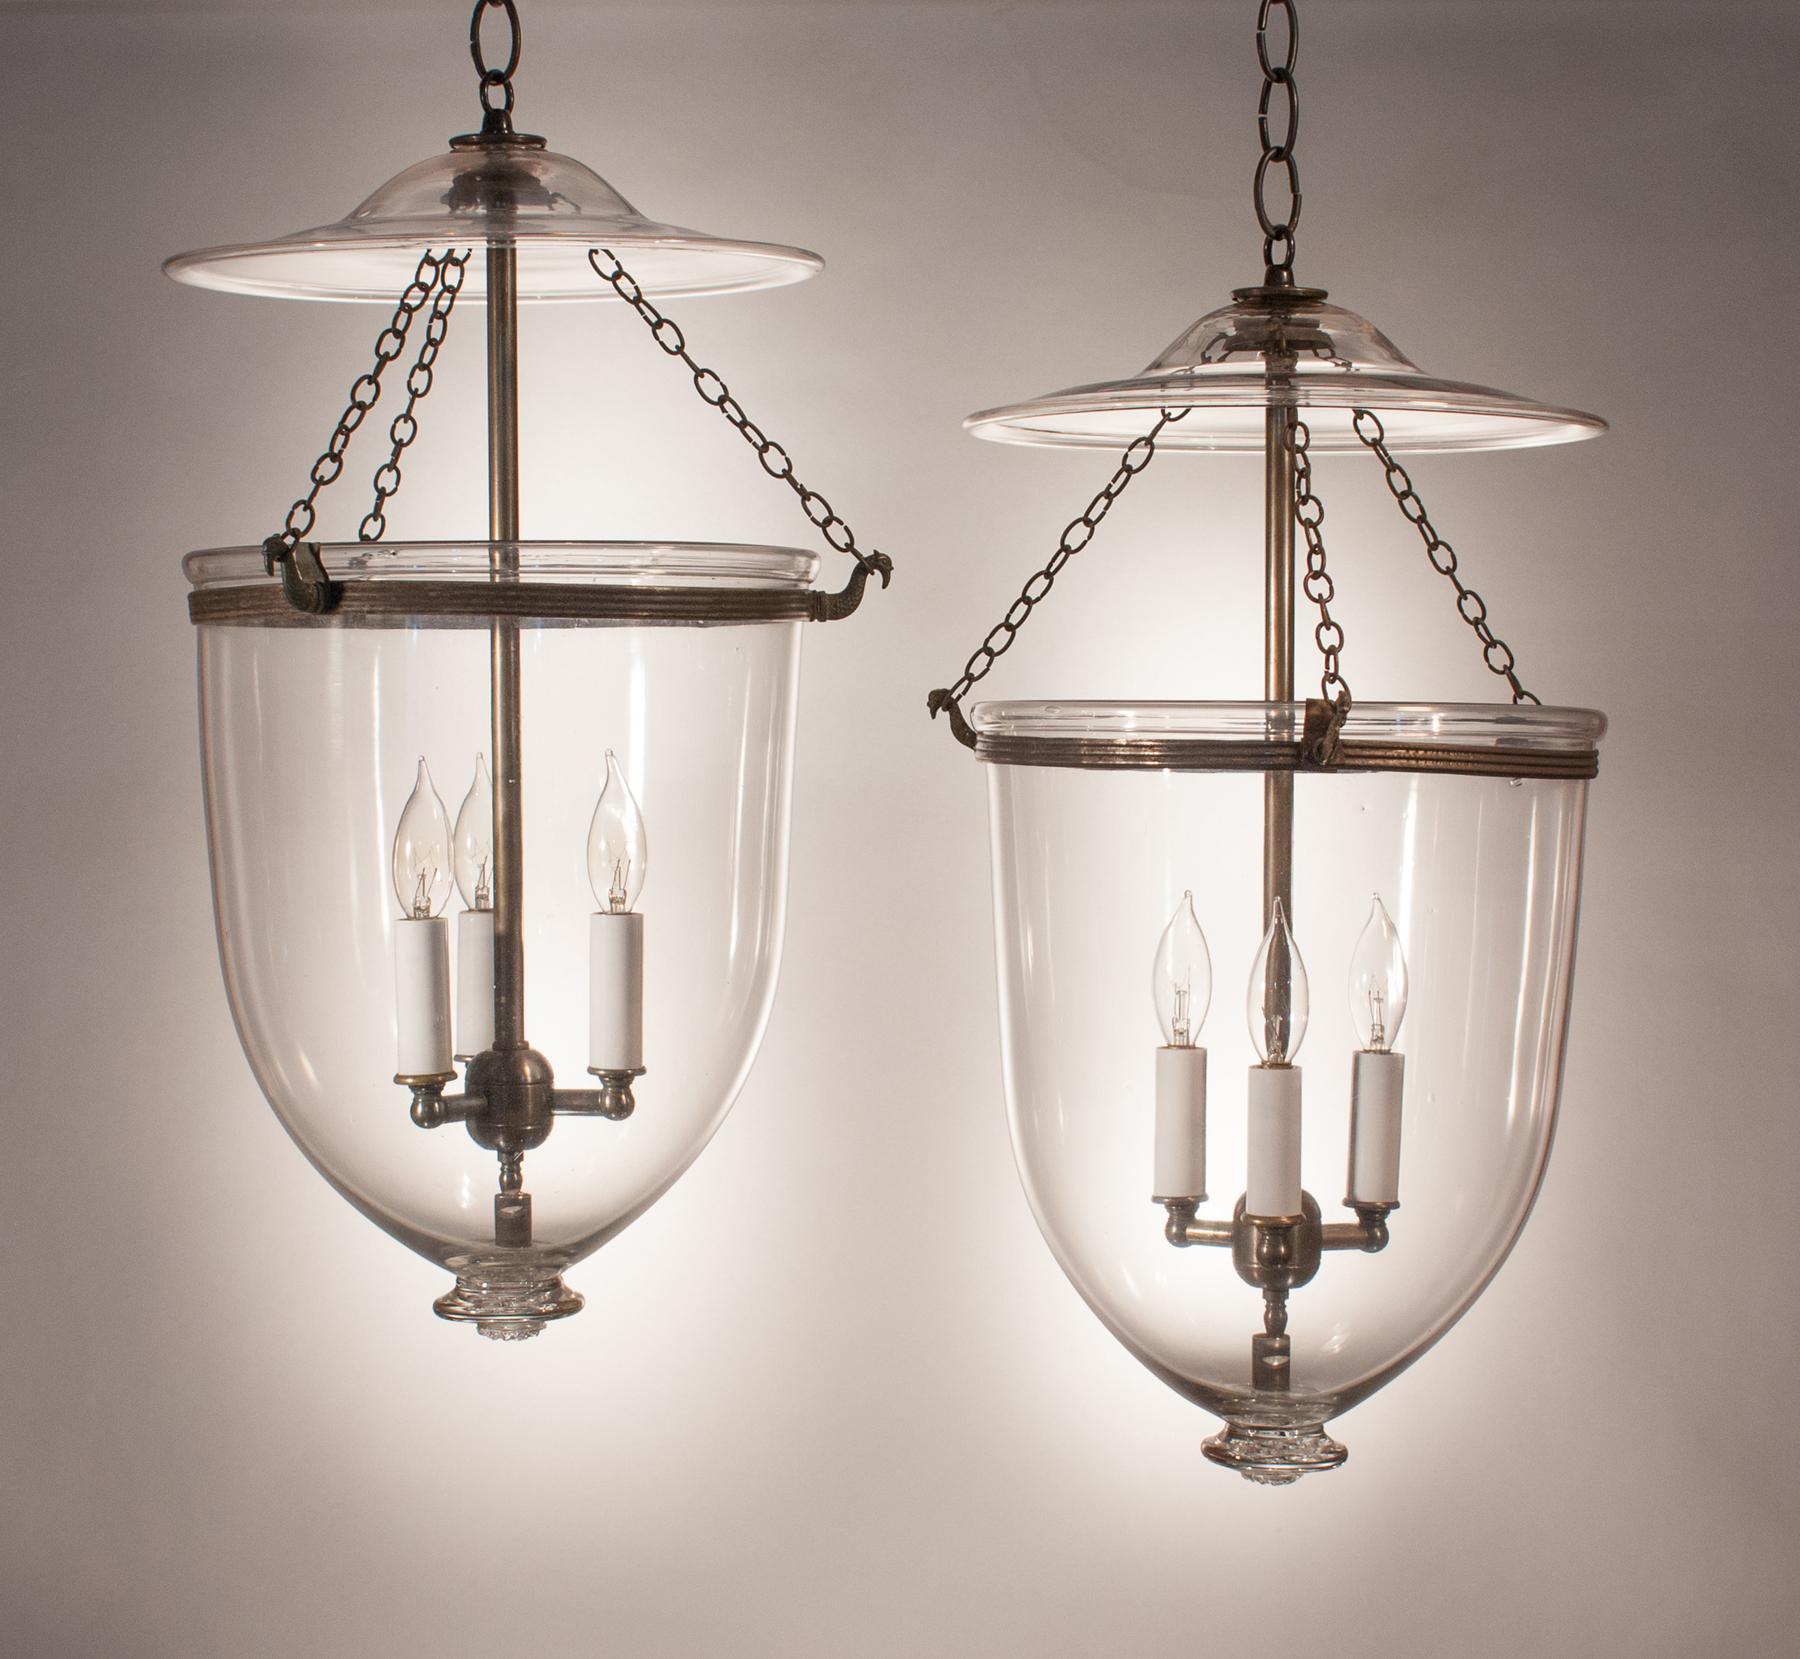 An outstanding pair of bell jar lanterns, circa 1870, with original rolled brass bands. The quality of the clear, hand blown glass is excellent, and the glass pontil bases have a nice spiral pattern. The set is very well-matched pair and has